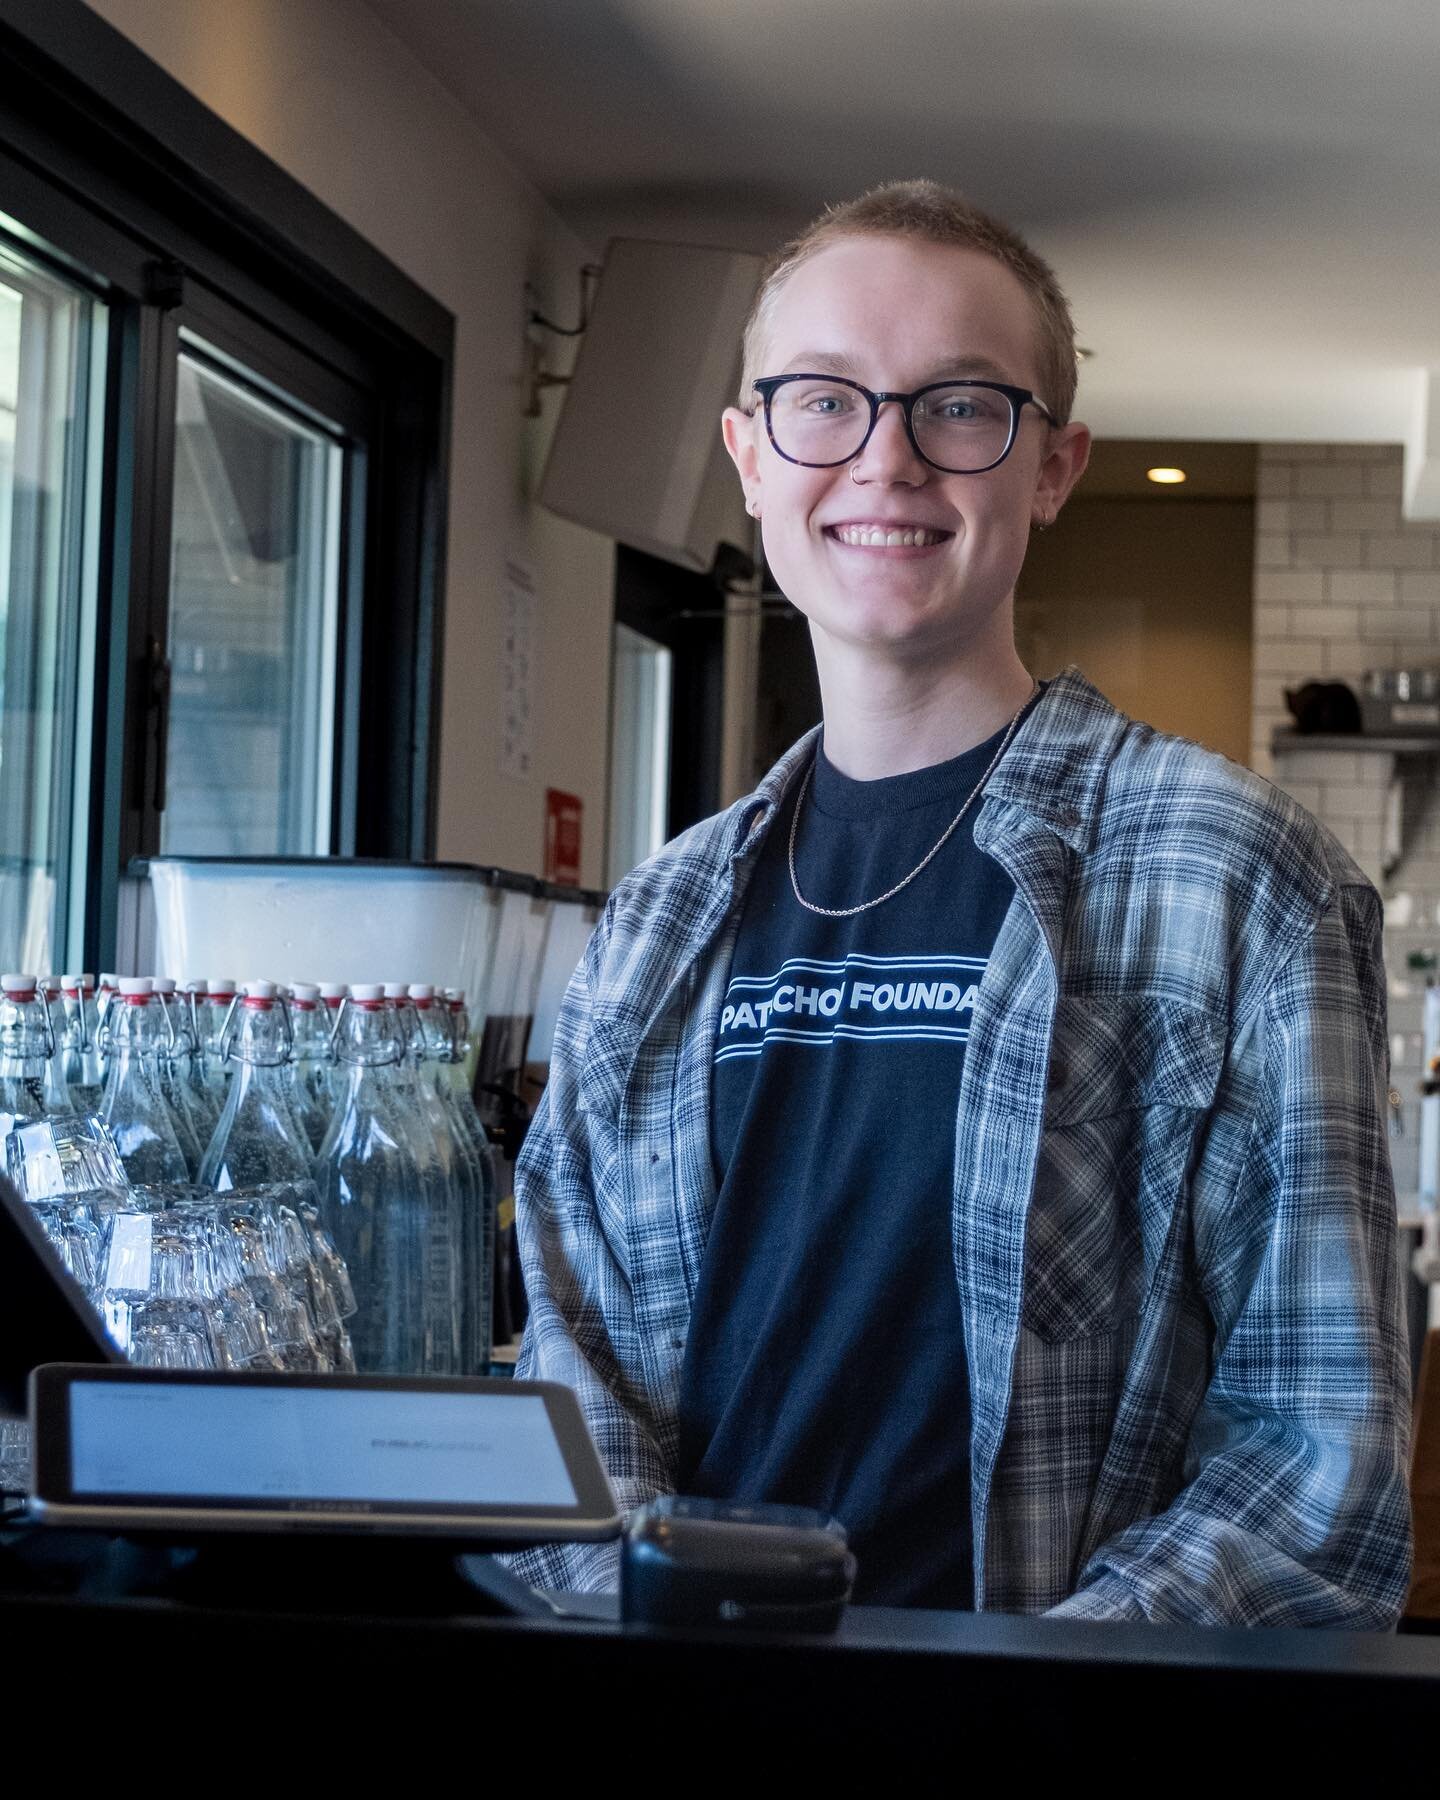 Reed has been with us during the Spring Semester of Food Fellowship, collaborating with Ben @publicgreens to learn about the hospitality industry. They&rsquo;re building essential skills like conflict resolution, communication, and problem-solving. #